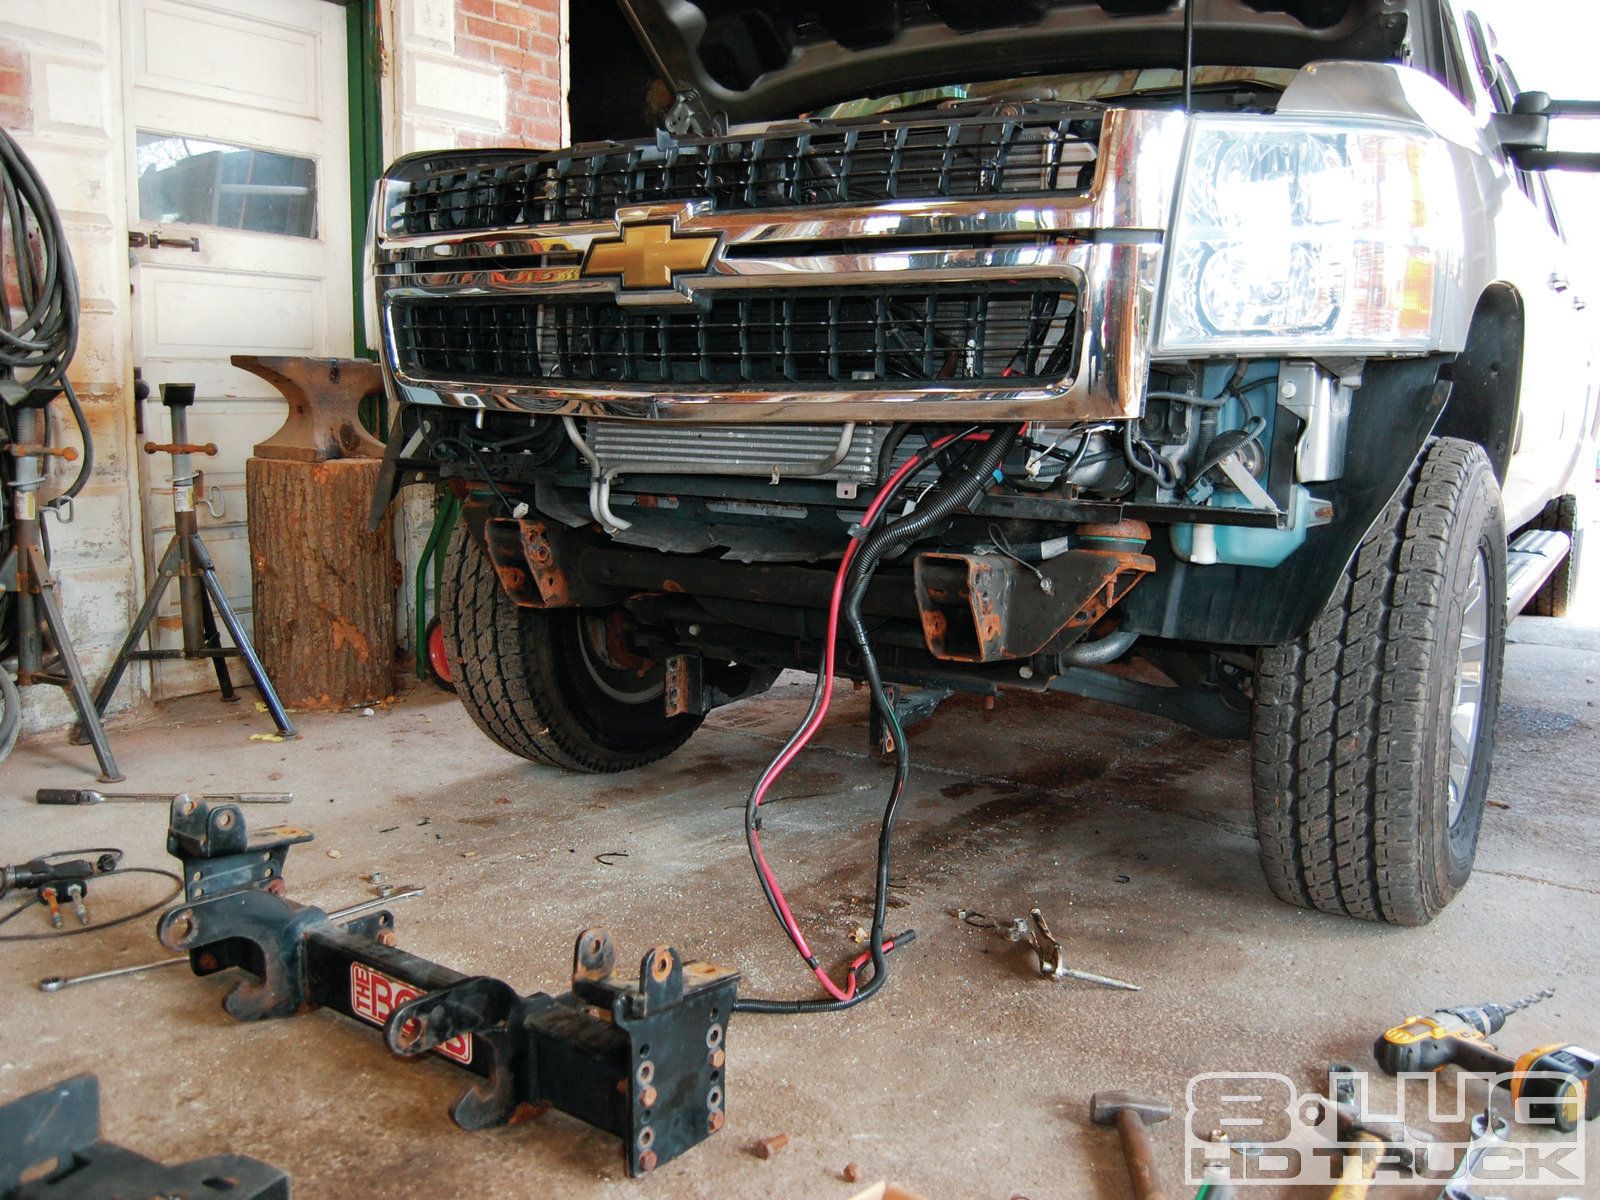 1210-8l-36+winch-time-ultimate-tow-and-work-truck-upgrades+new-plow-mounts.jpg